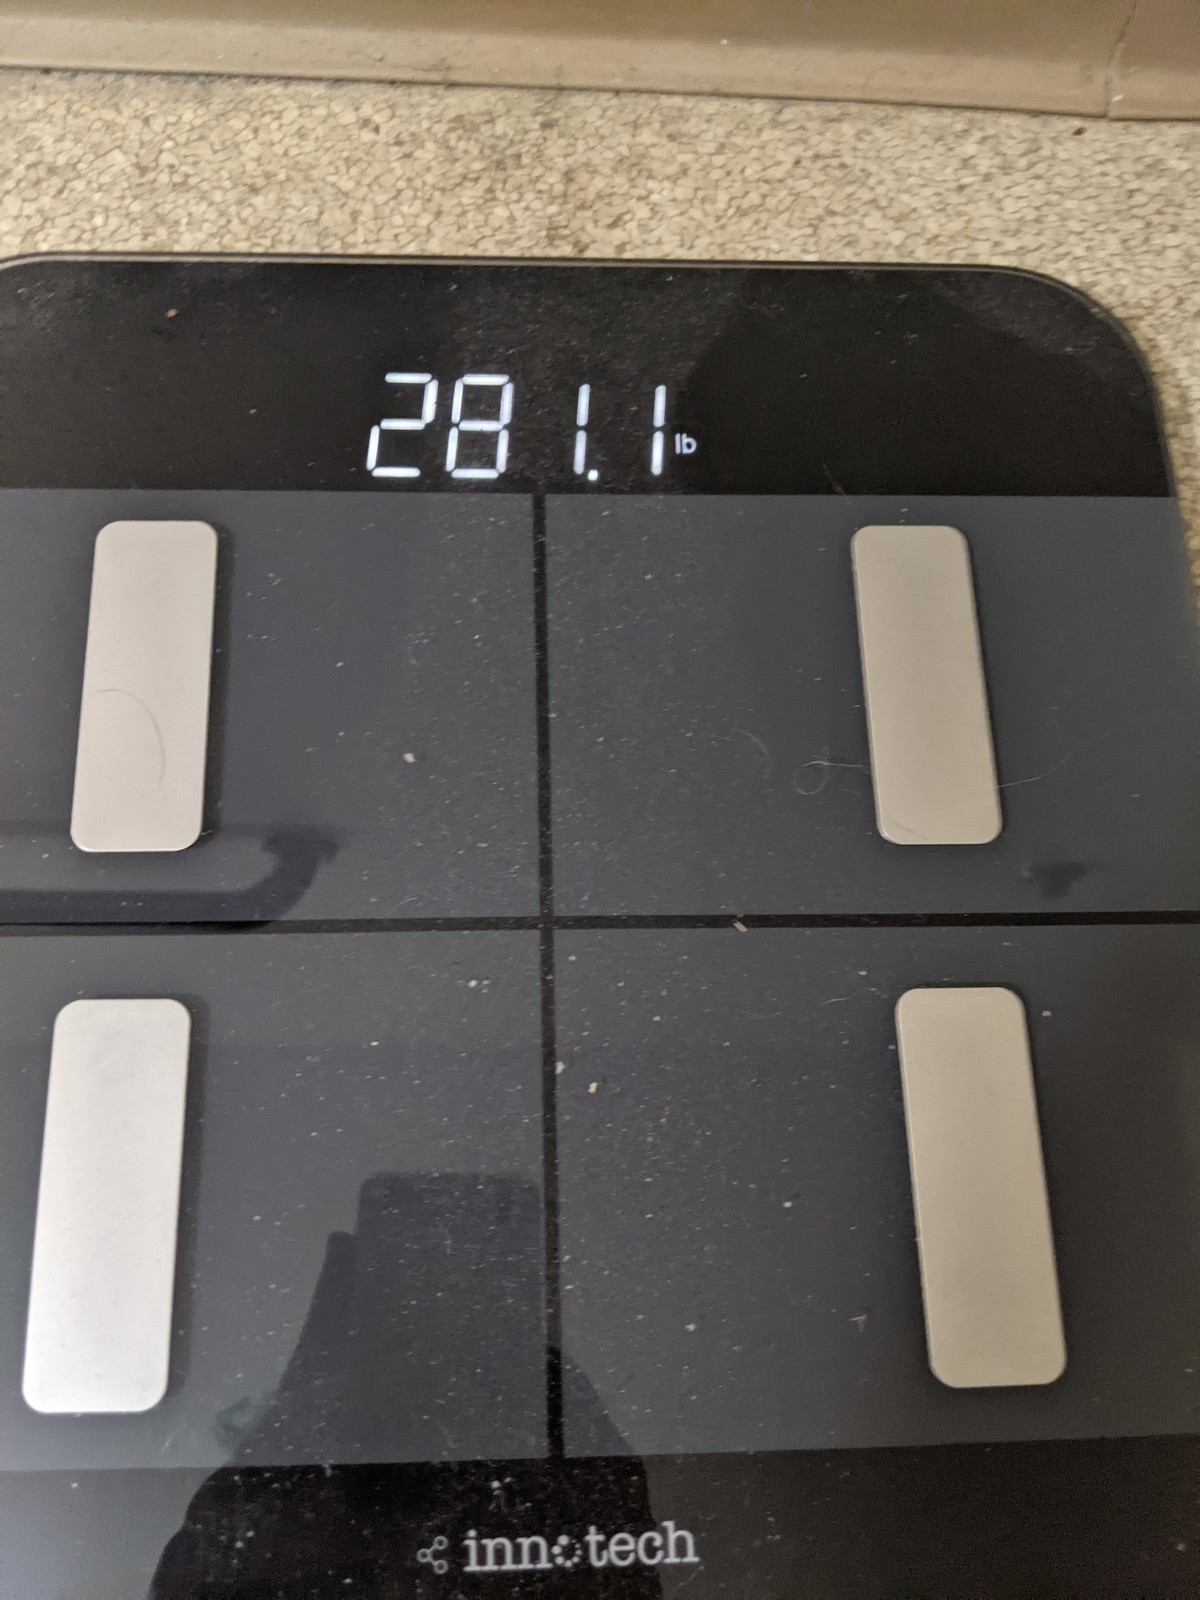 November 2021 weight log. What, did you faggots think I'd forget to post my update? Last day on November here in the states so I got time! Honestly surprised th